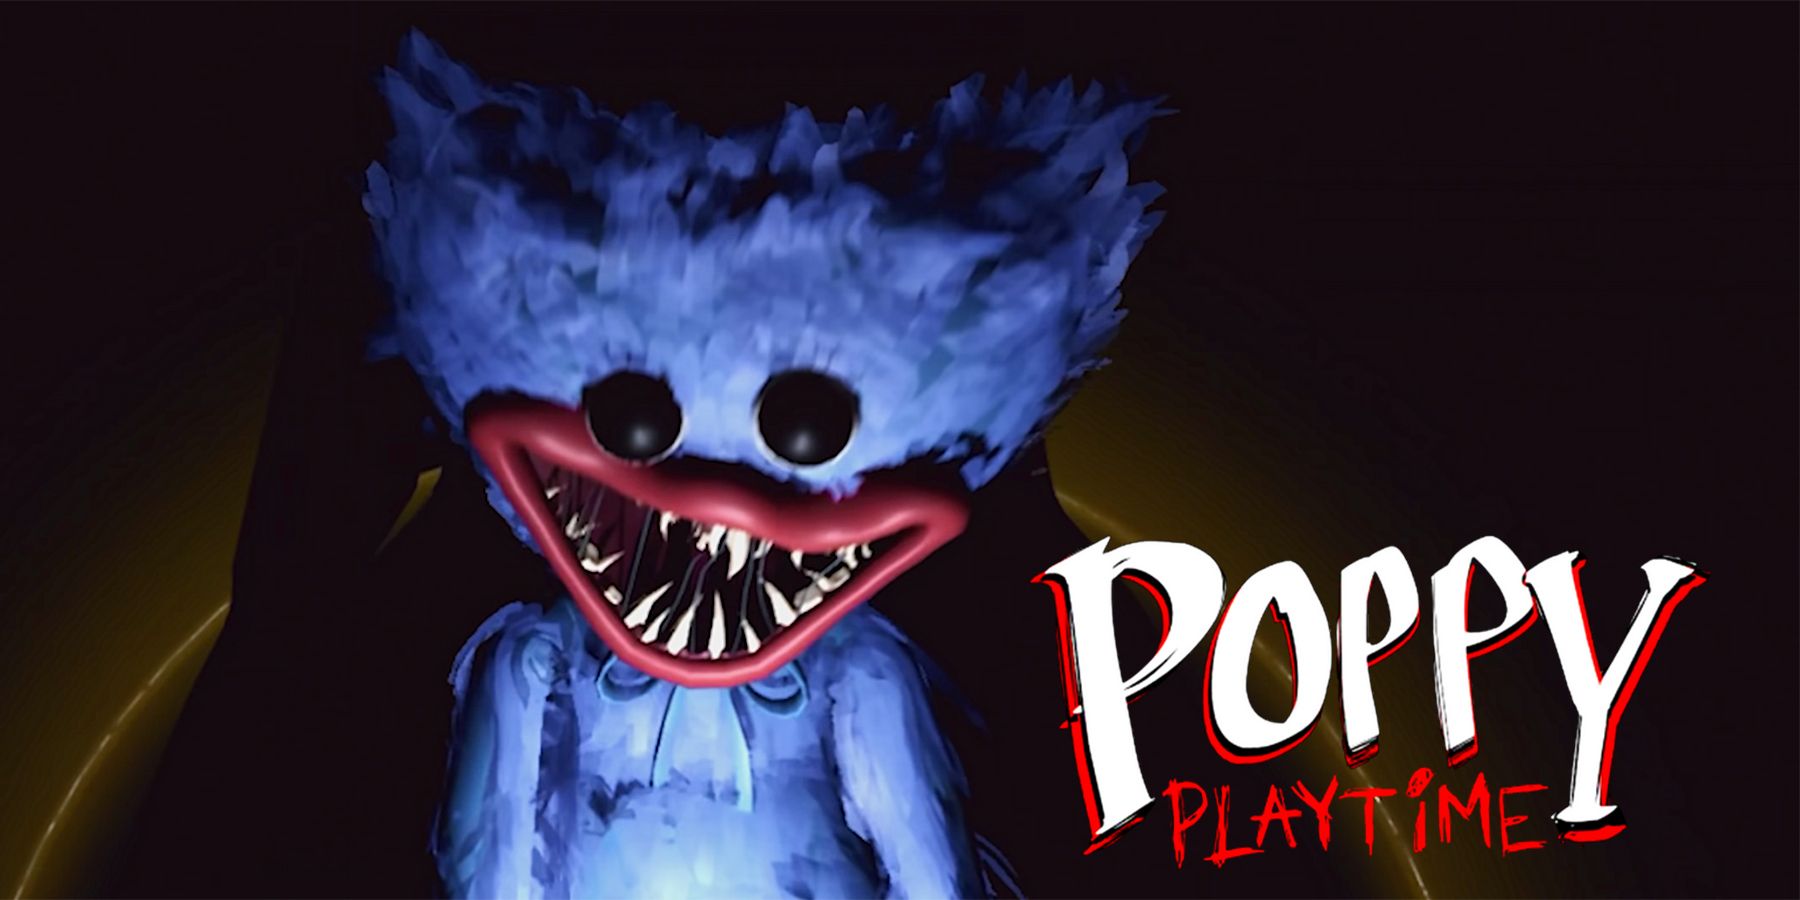 Relive the Horrors of Poppy Playtime with the all NEW update!